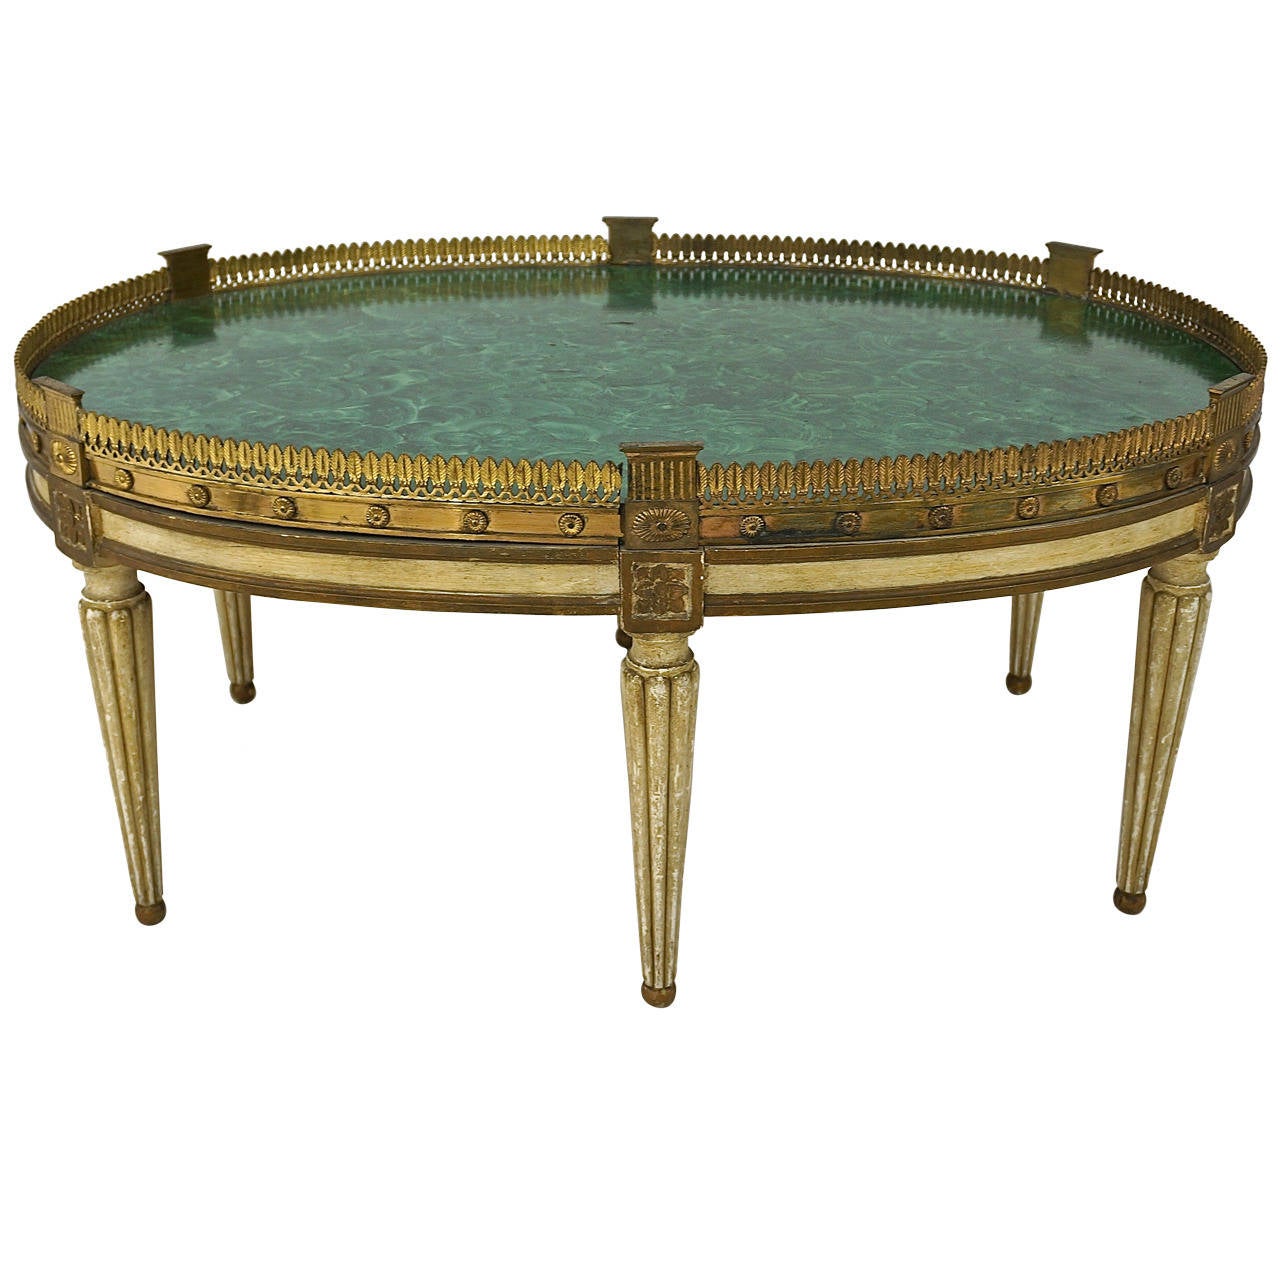 Louis XVI Style Oval Painted Cocktail Table with Faux Malachite Top at
1stdibs